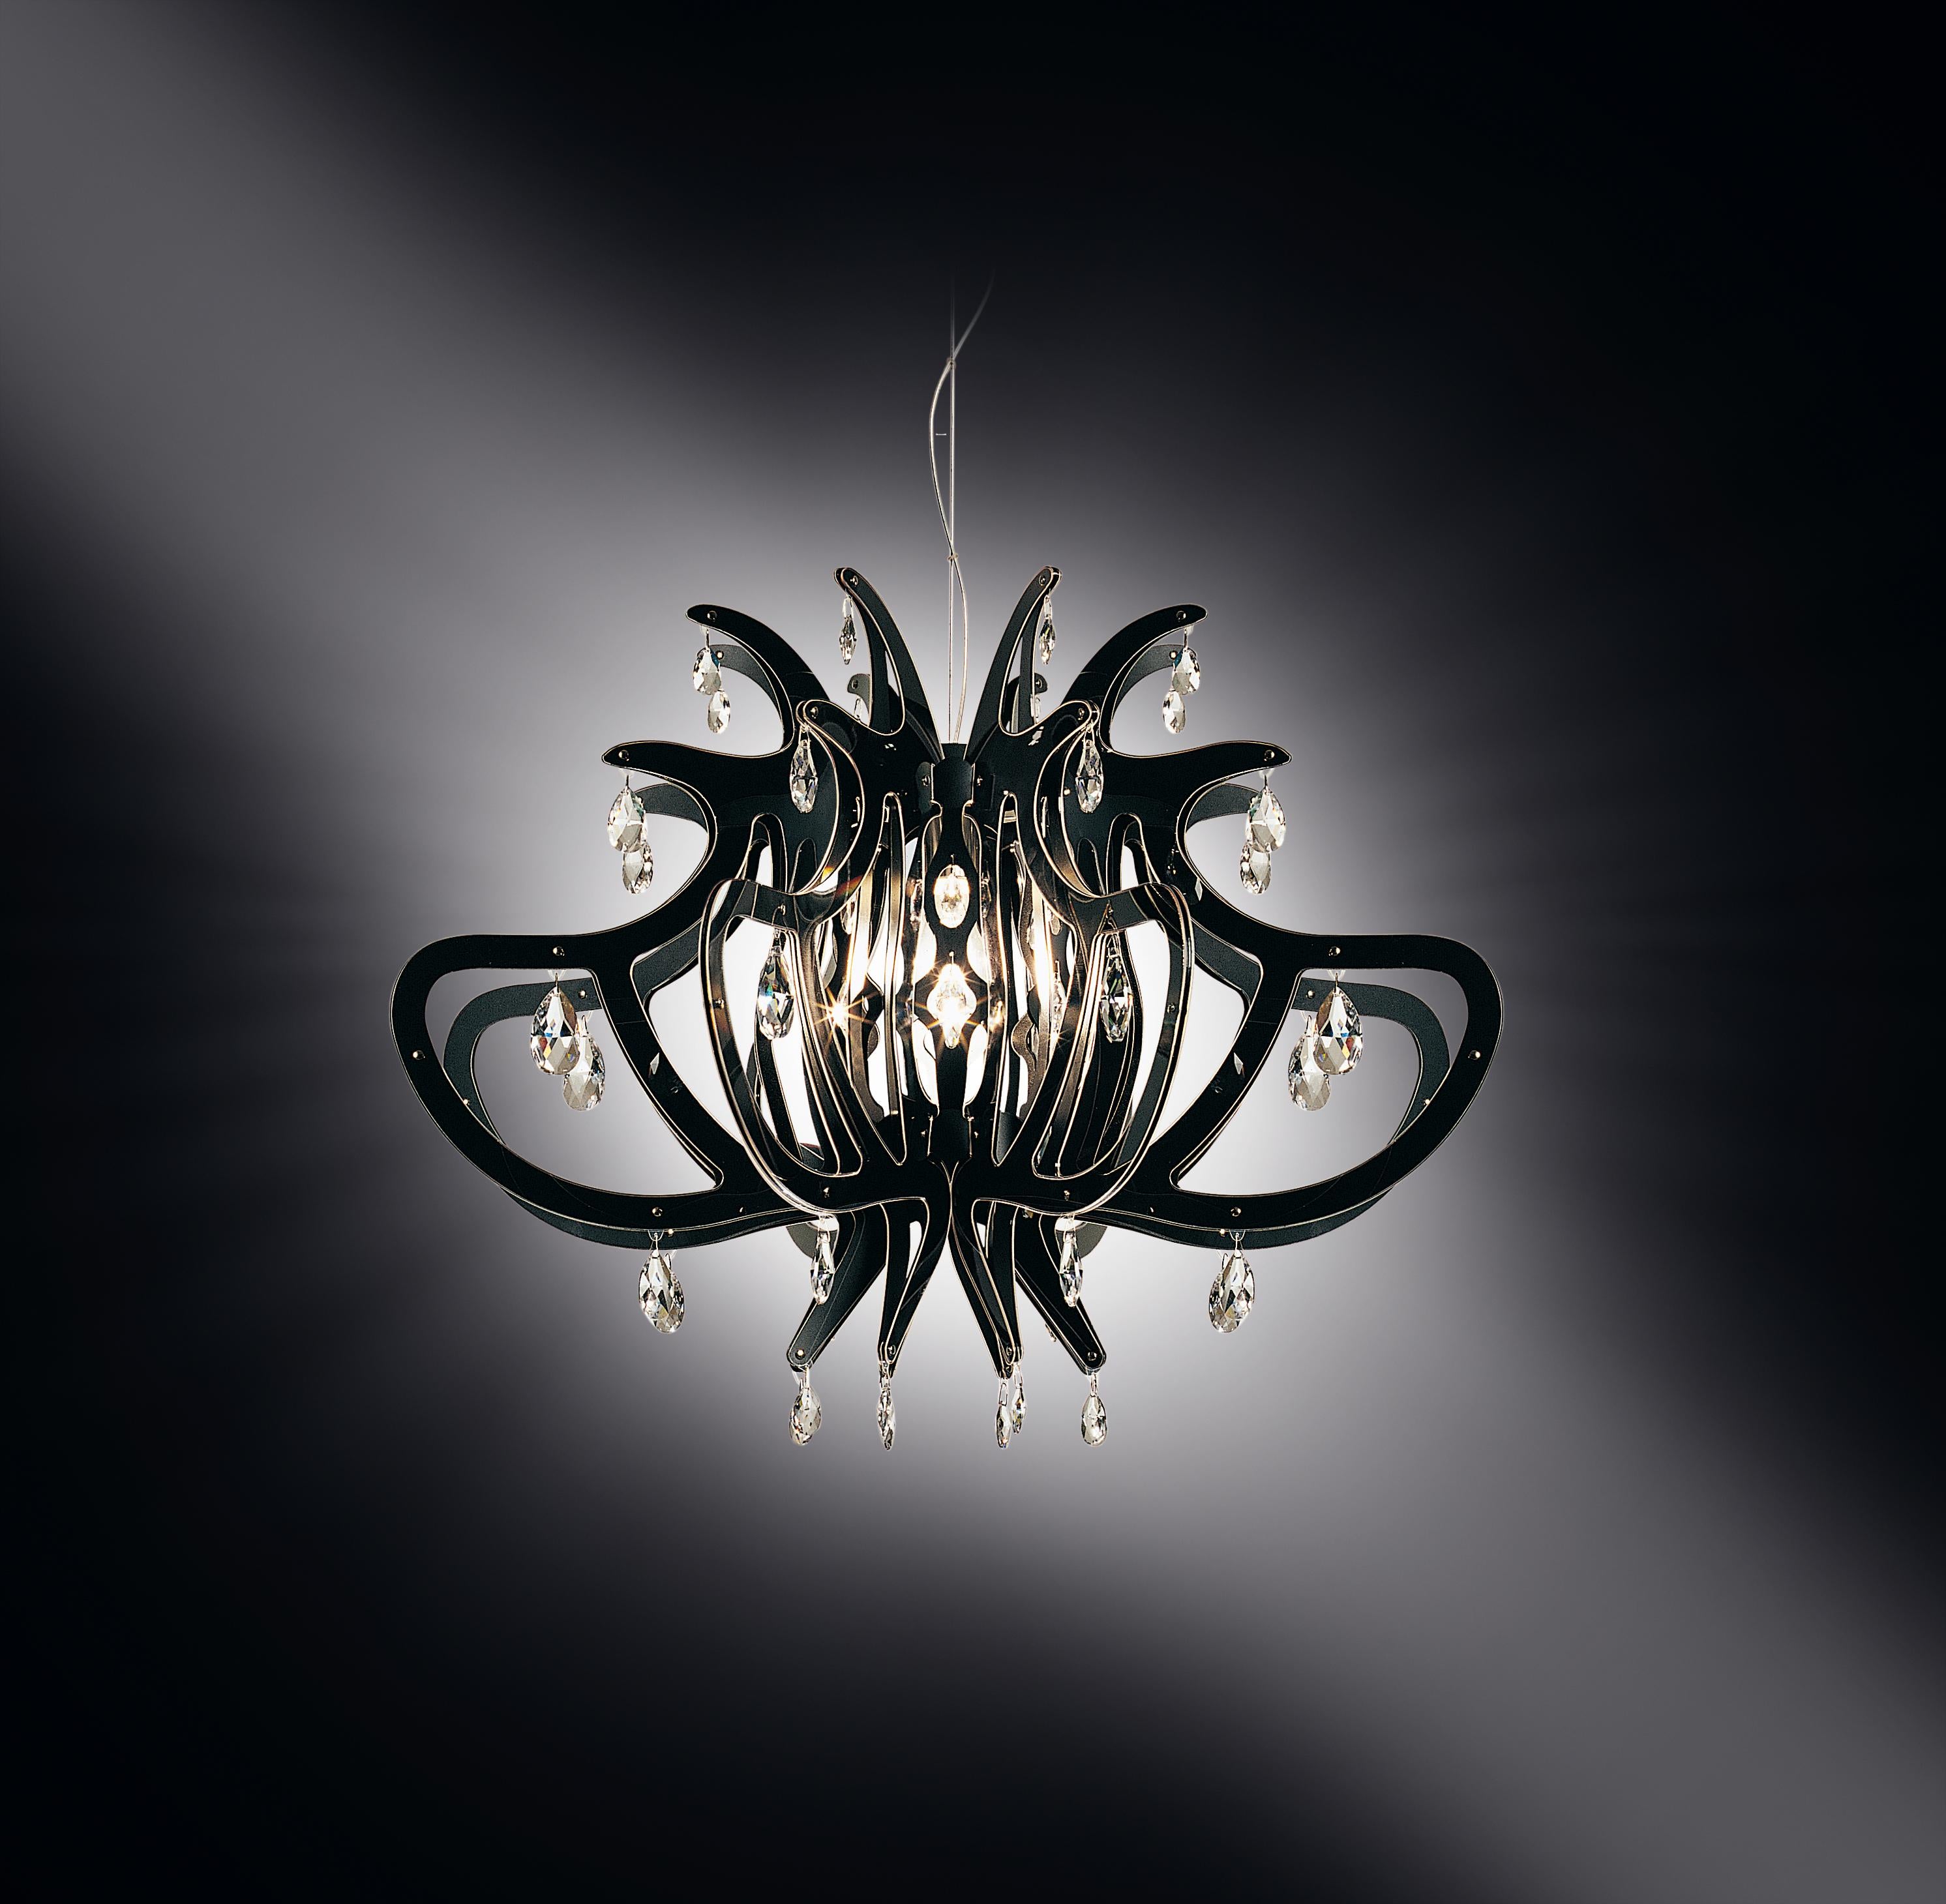 Medusa is a dramatic collection that marked SLAMP’s evolution of stylistic production just after the turn of the century. The radial structure easily connects to the central Cristalflex® cylinder, that reflects the added luxury of transparent